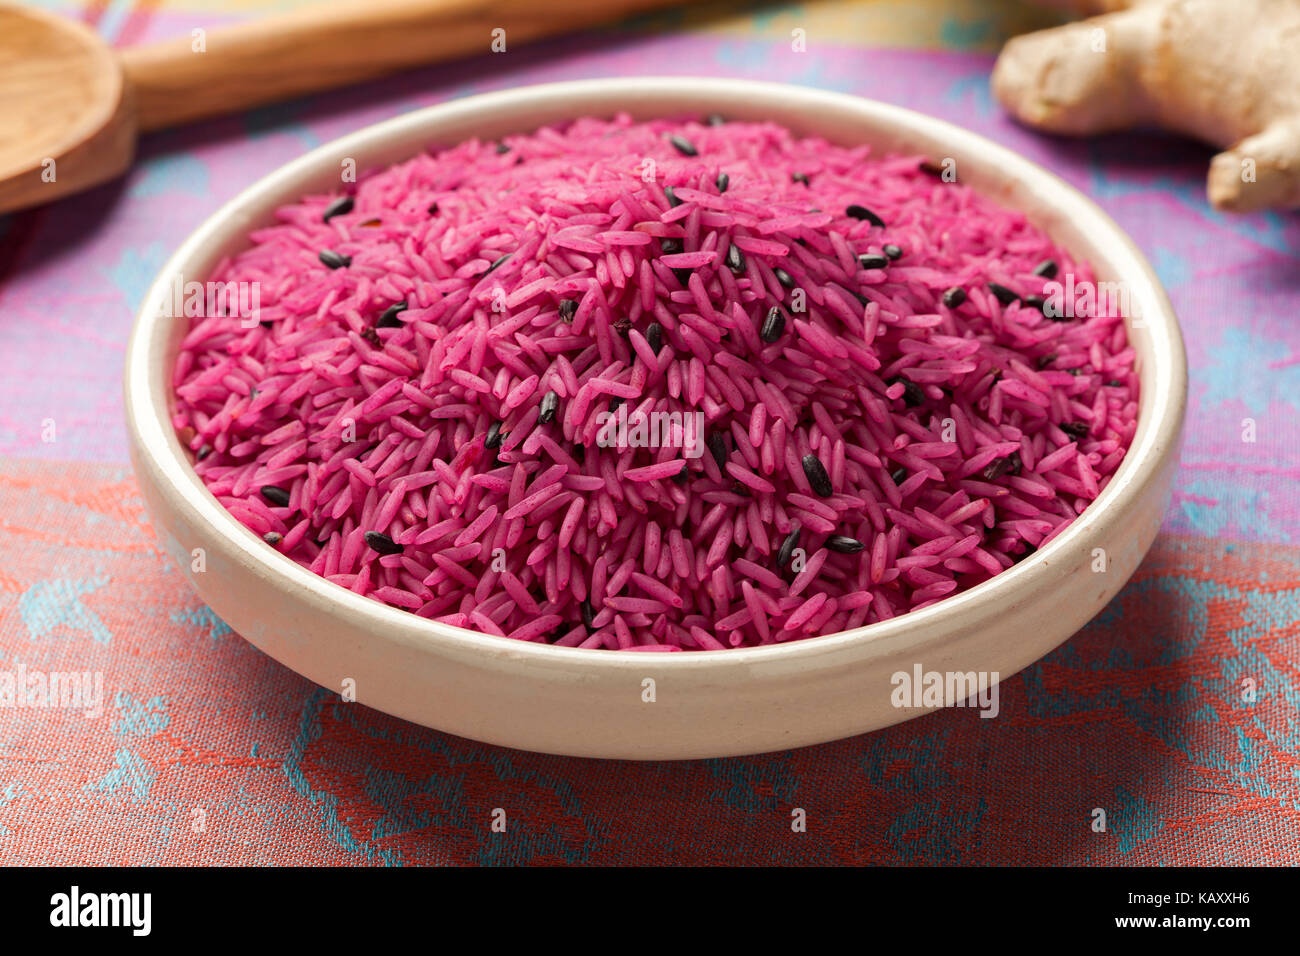 Bowl with red organic uncooked indian rice Stock Photo